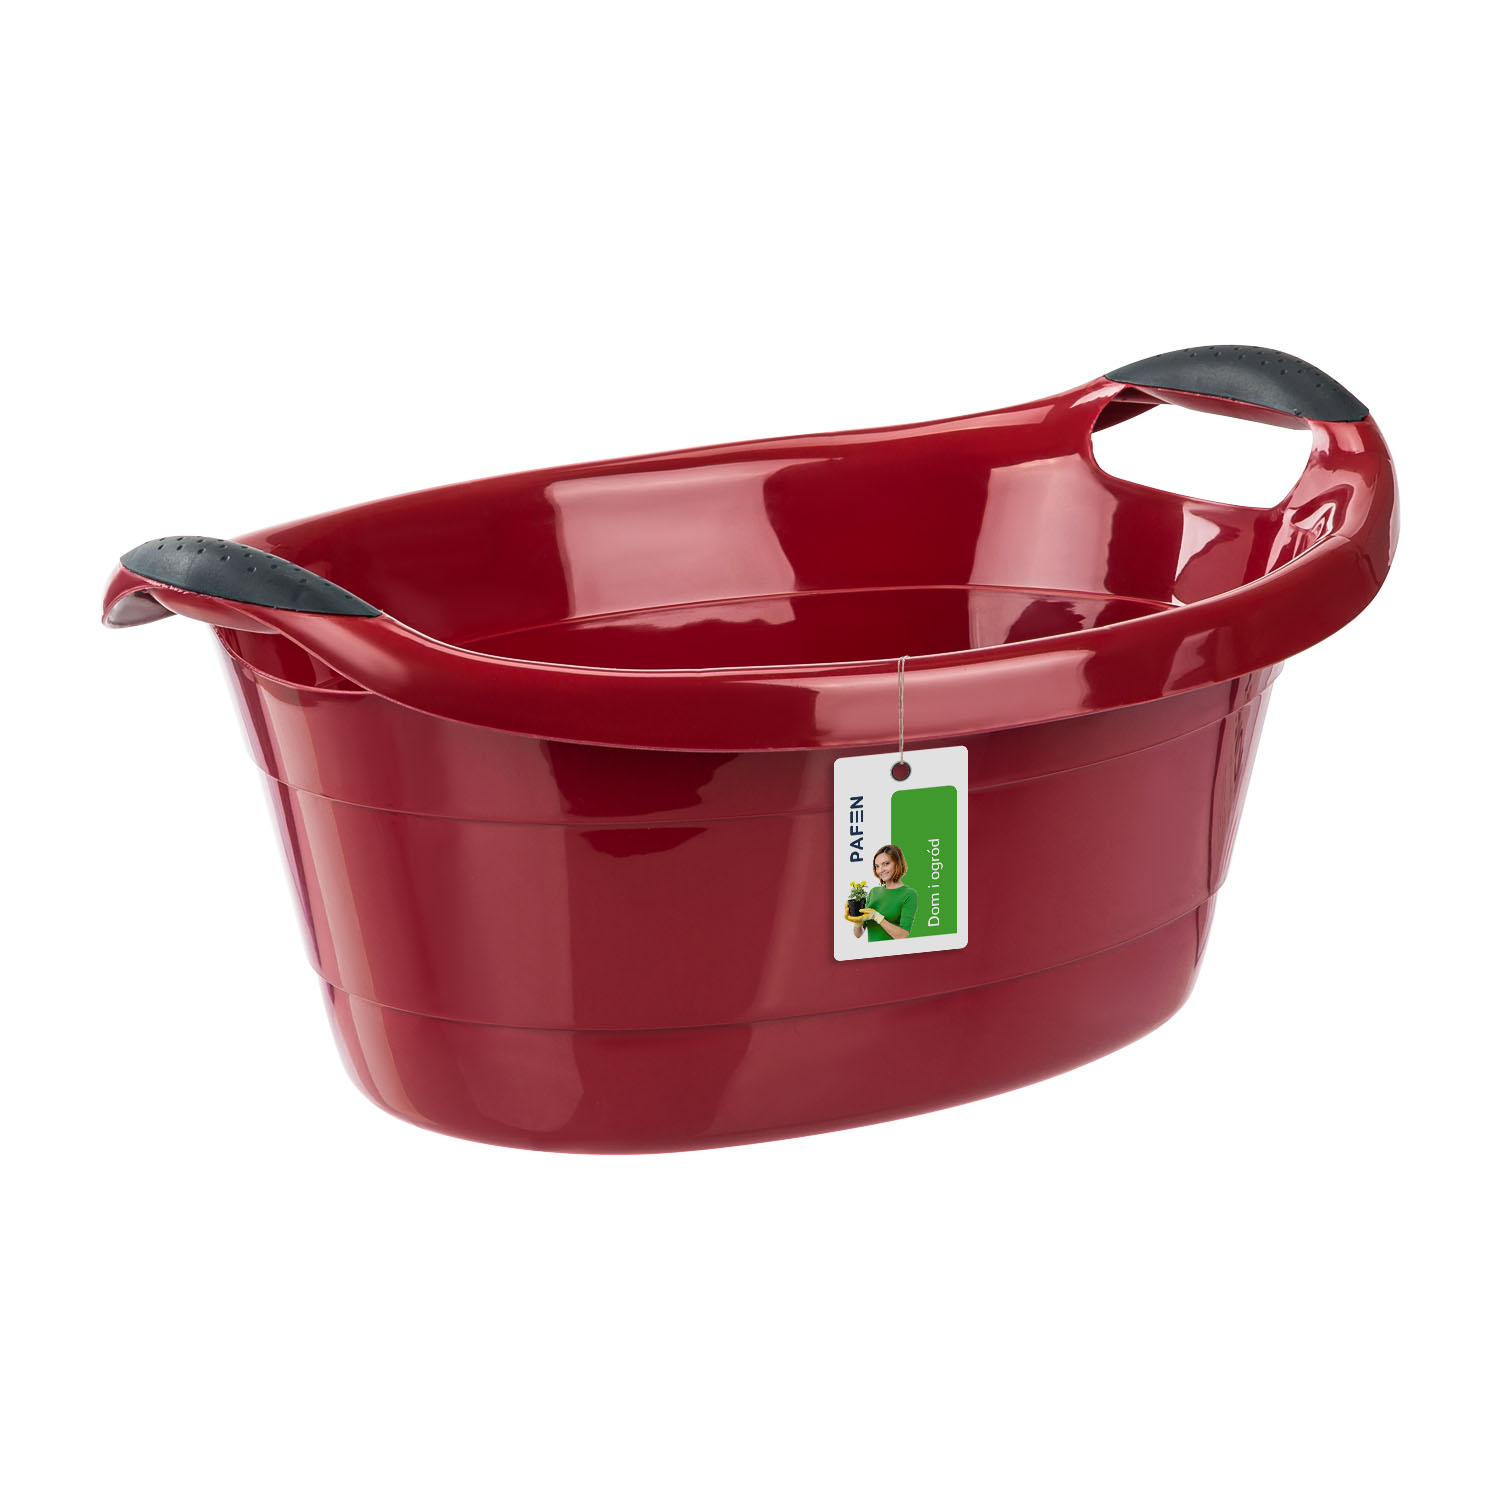 Laundry bowl Red